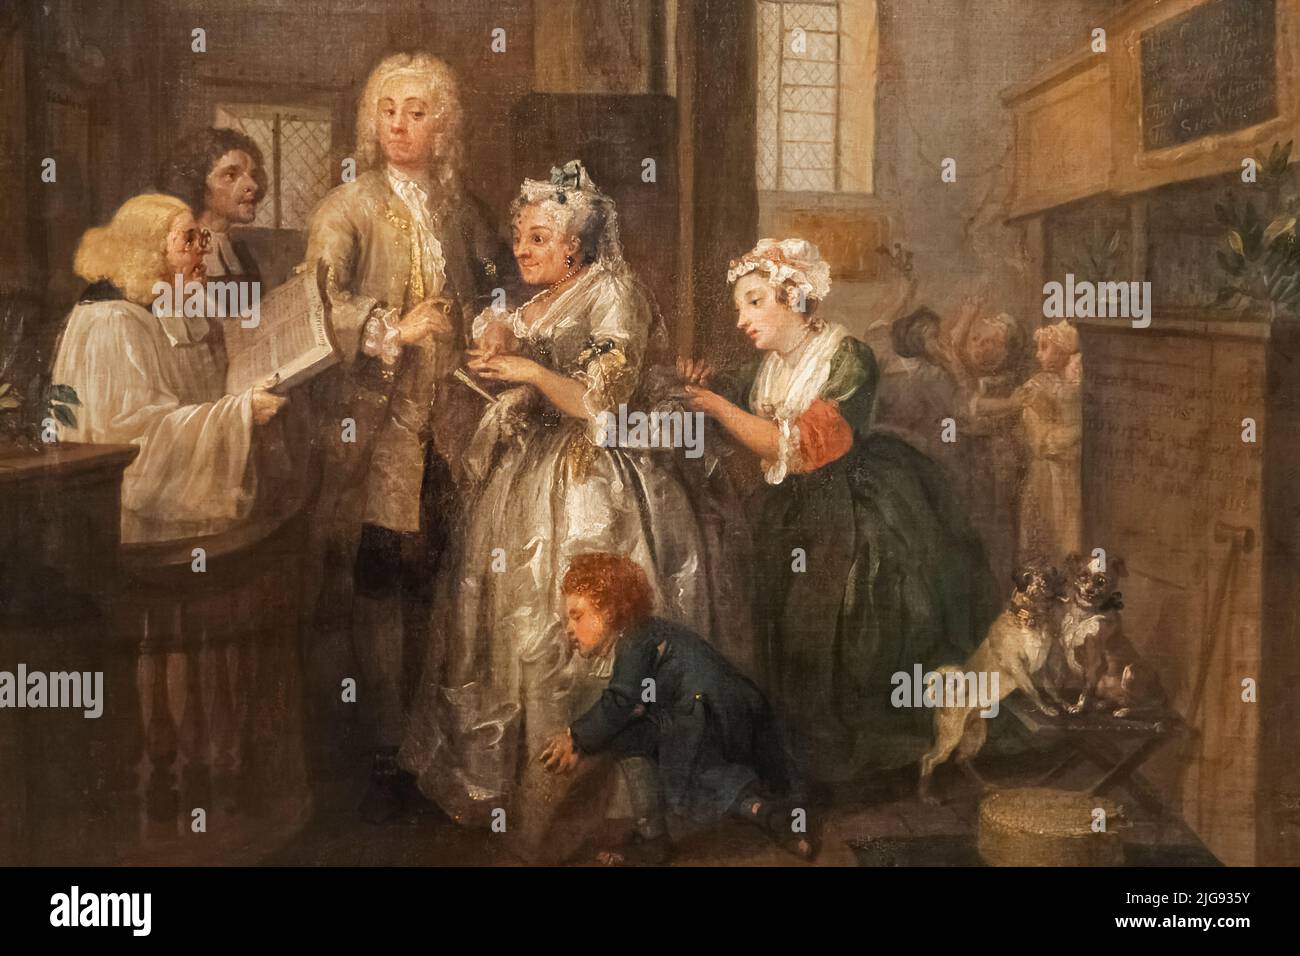 Painting from The Rake's Progress titled 'The Marriage' by William Hogarth Stock Photo